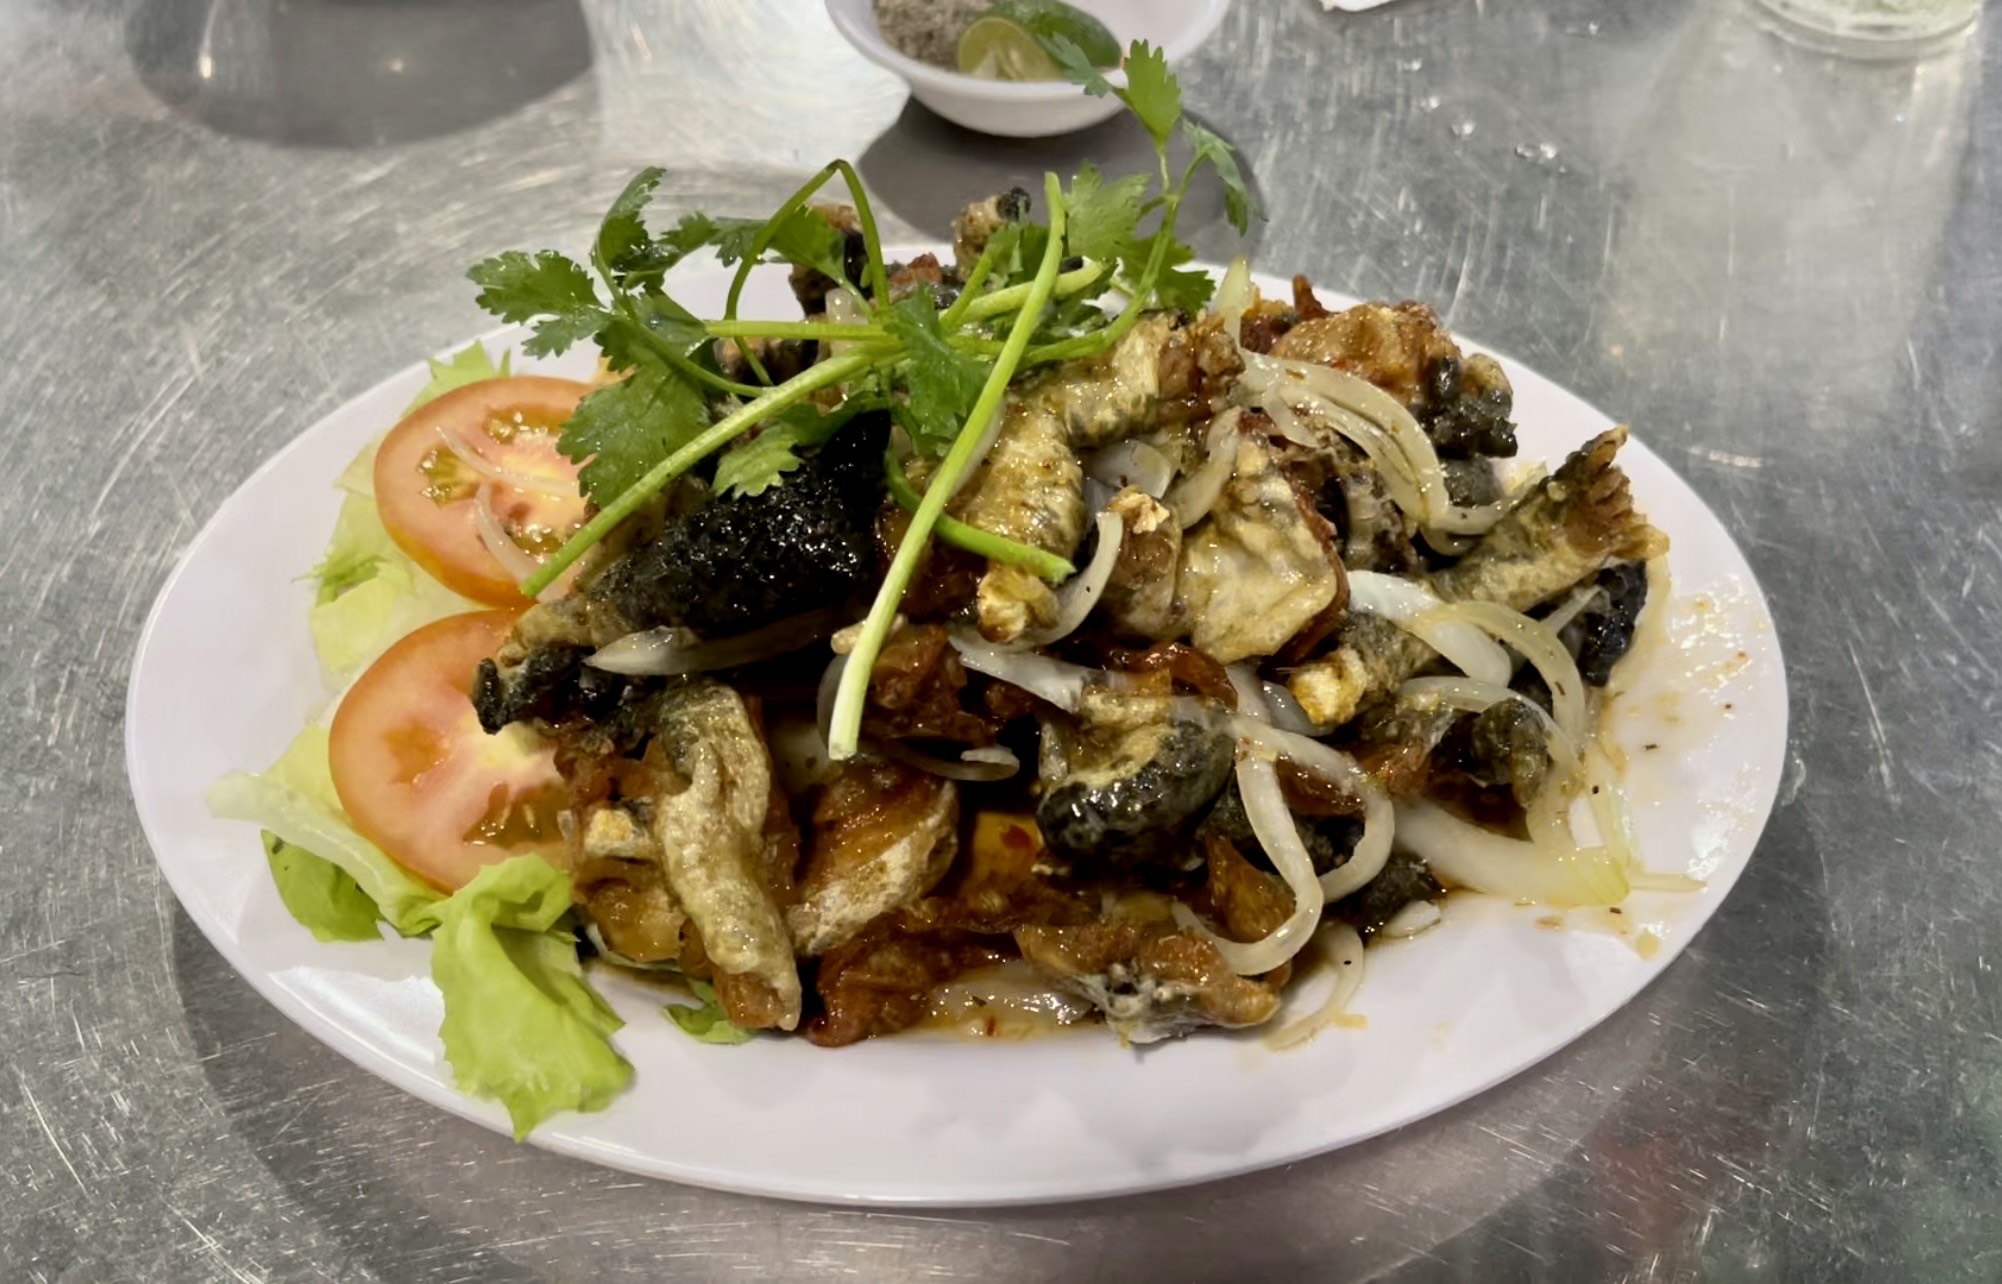 A dish of 'ech chien nuoc mam' (frog fried with fish sauce) is served at a shop in Binh Thanh District, Ho Chi Minh City, Vietnam. Photo: Jordy Comes Alive